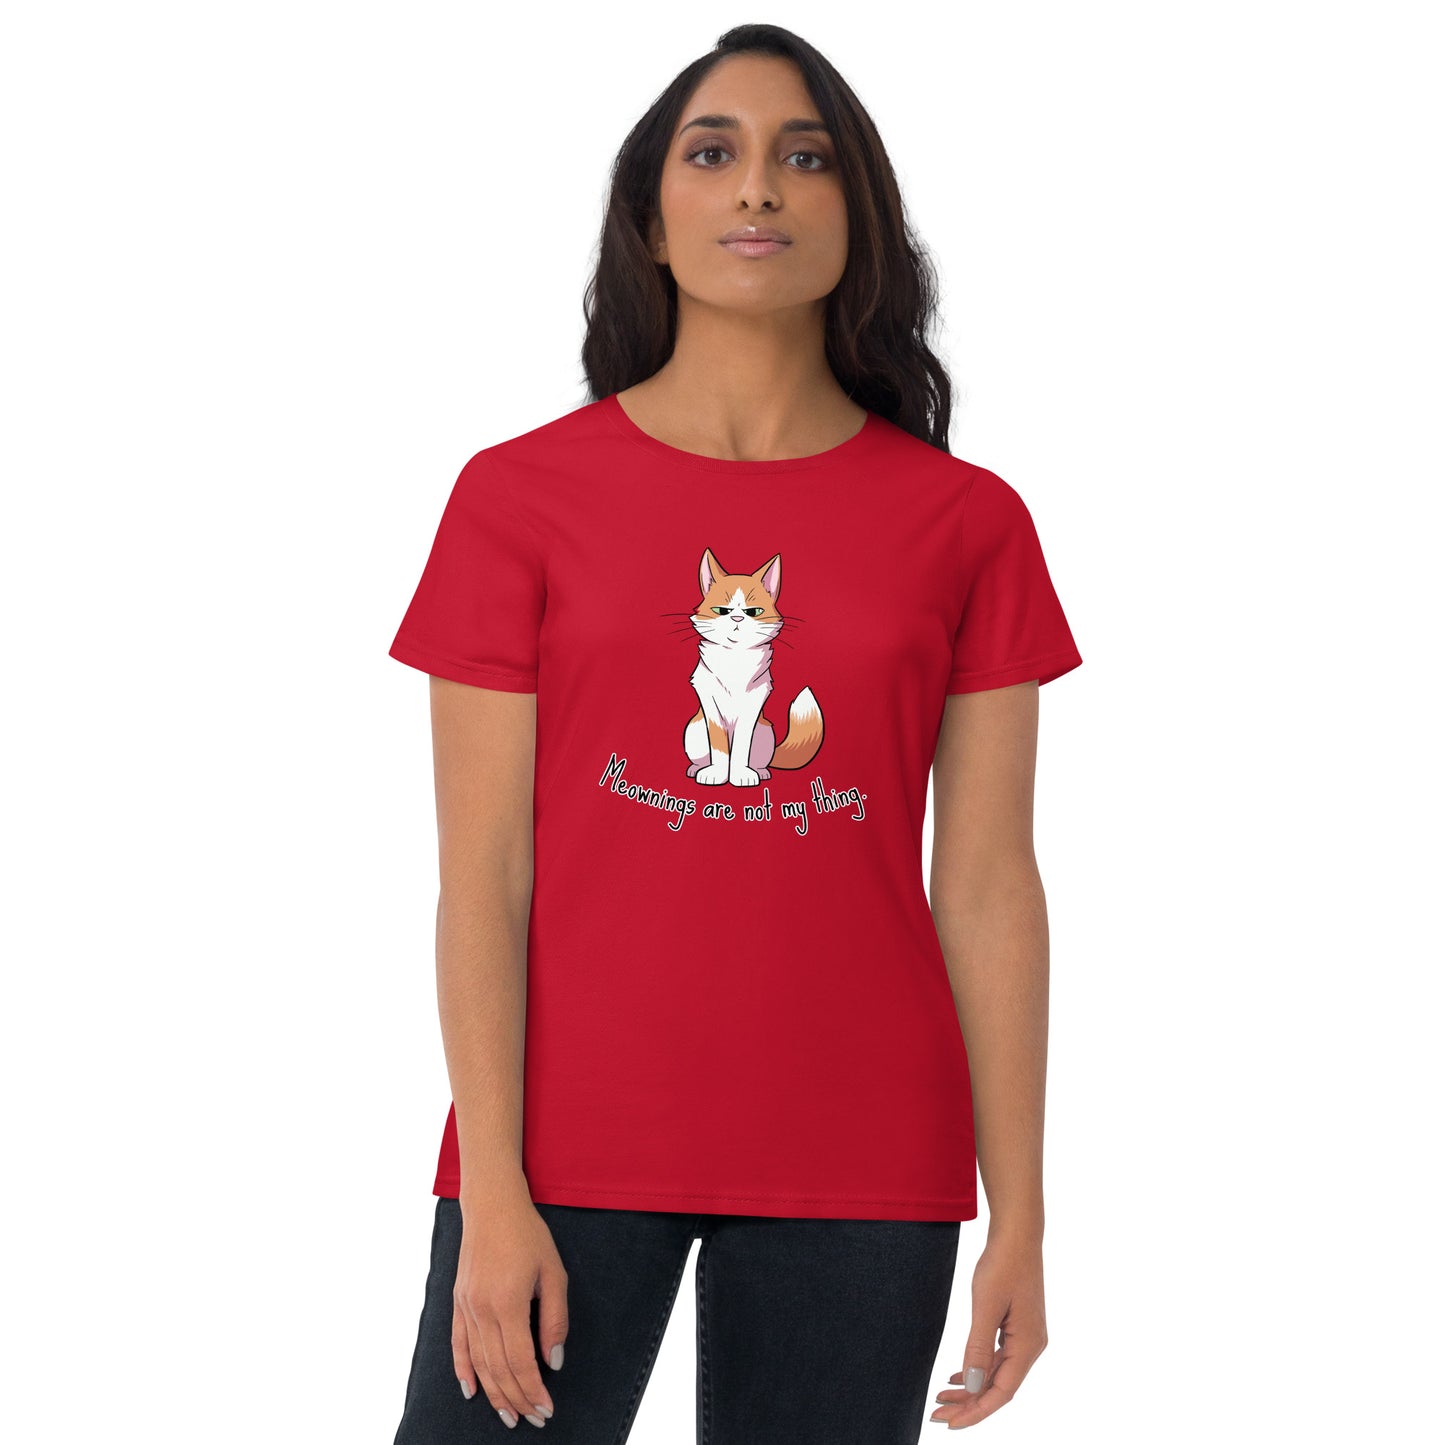 Ginger - Meownings are not my thing Women's short sleeve t-shirt